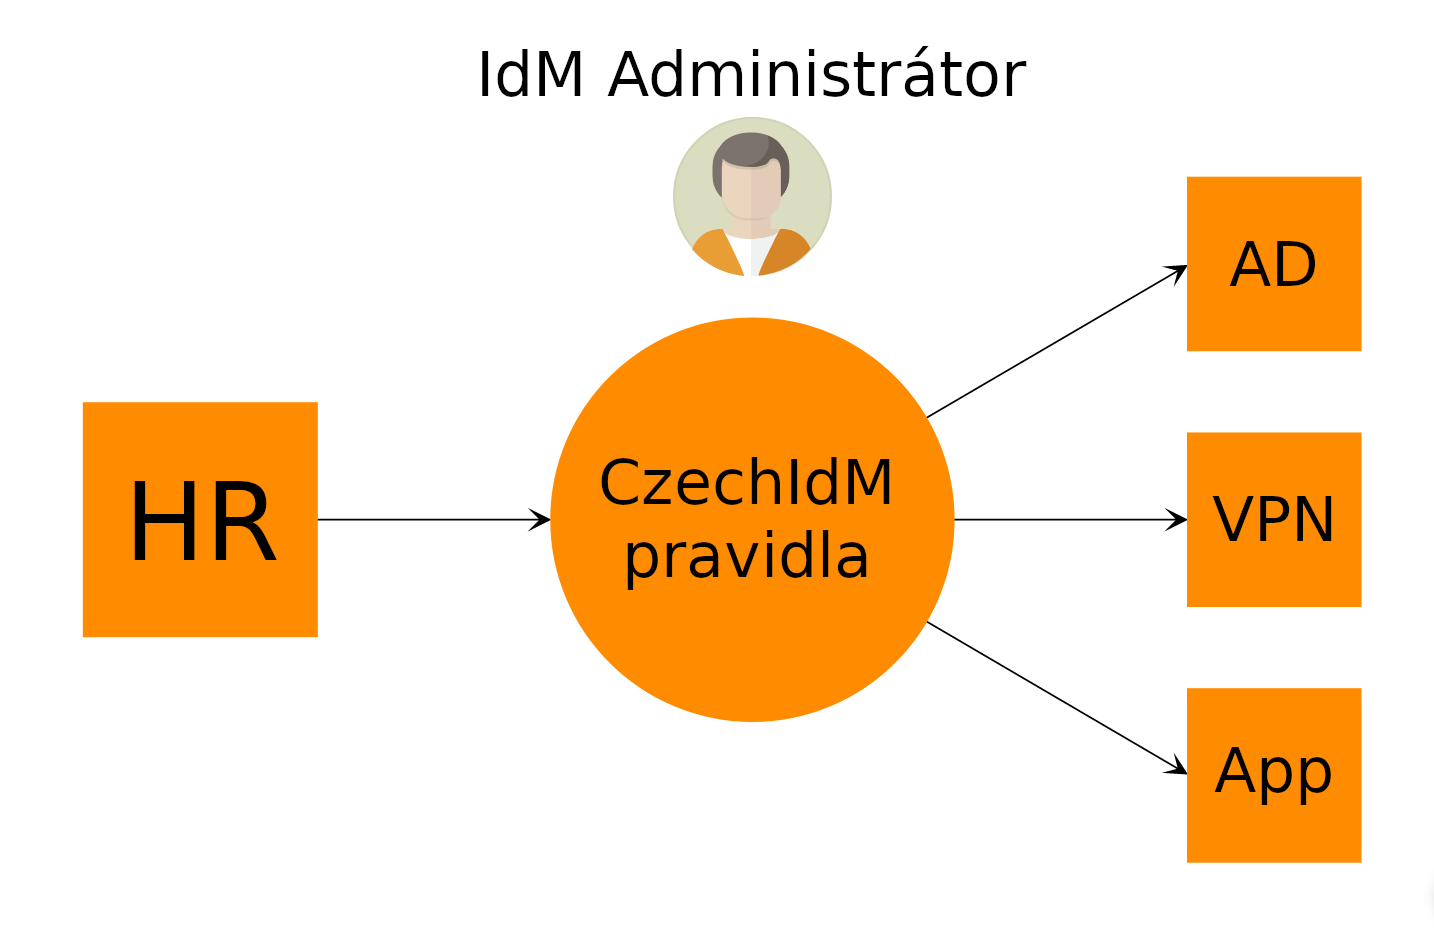 Czechdm provision data from HR system